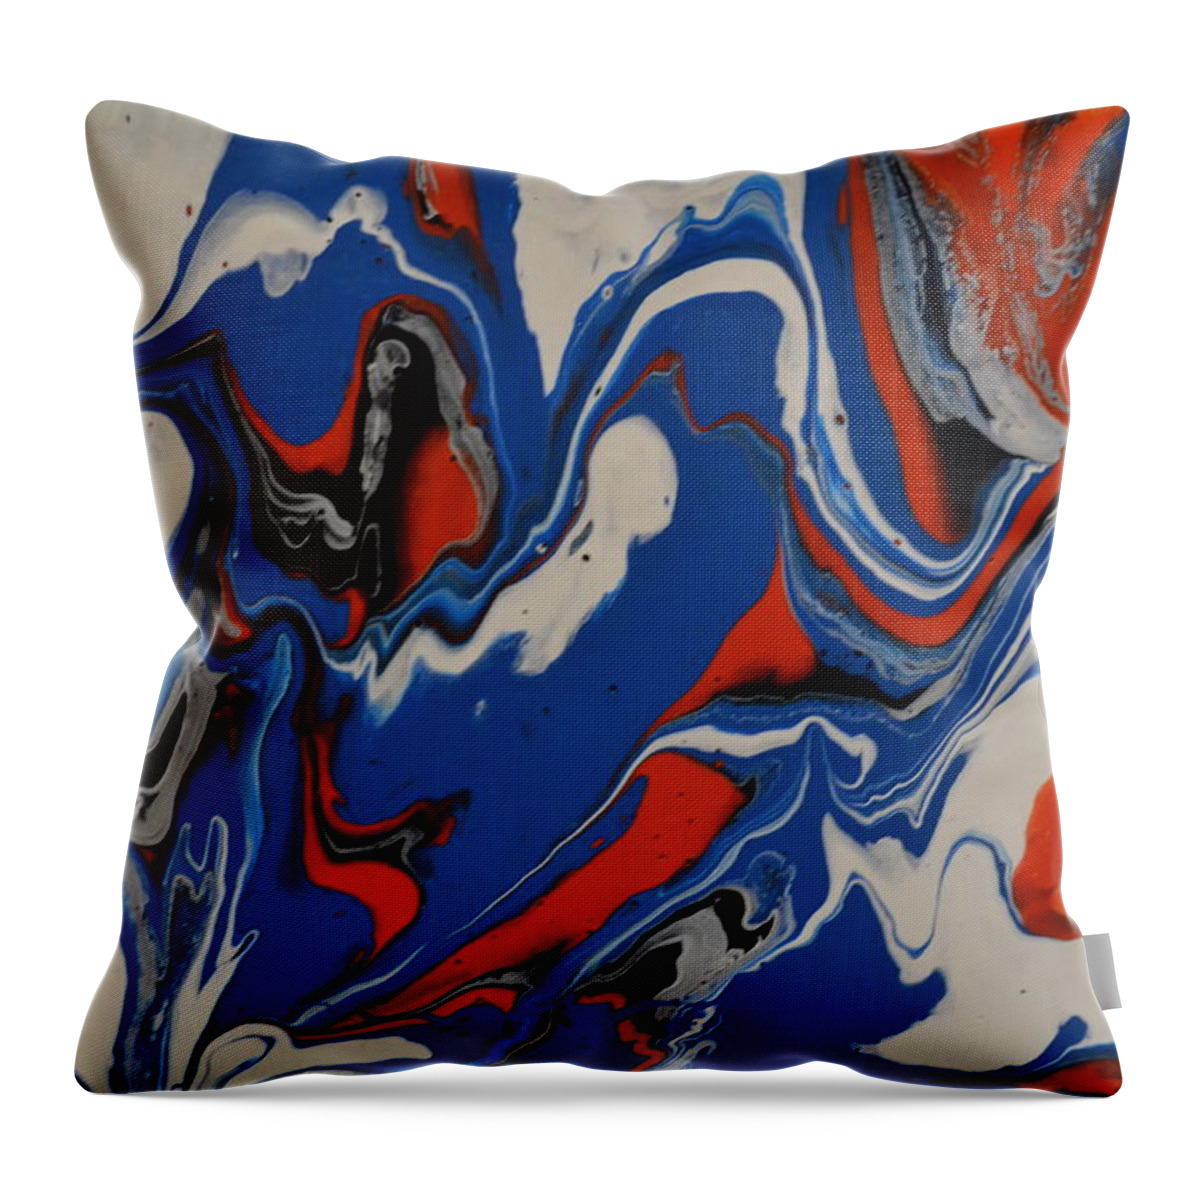 A Abstract Painting Of Large Blue Waves With White Tips. The Waves Are Picking Up Red And Black Sand From The Beach. Some Of The Blue Waves Are Curling Over. Throw Pillow featuring the painting Big Blue Waves by Martin Schmidt